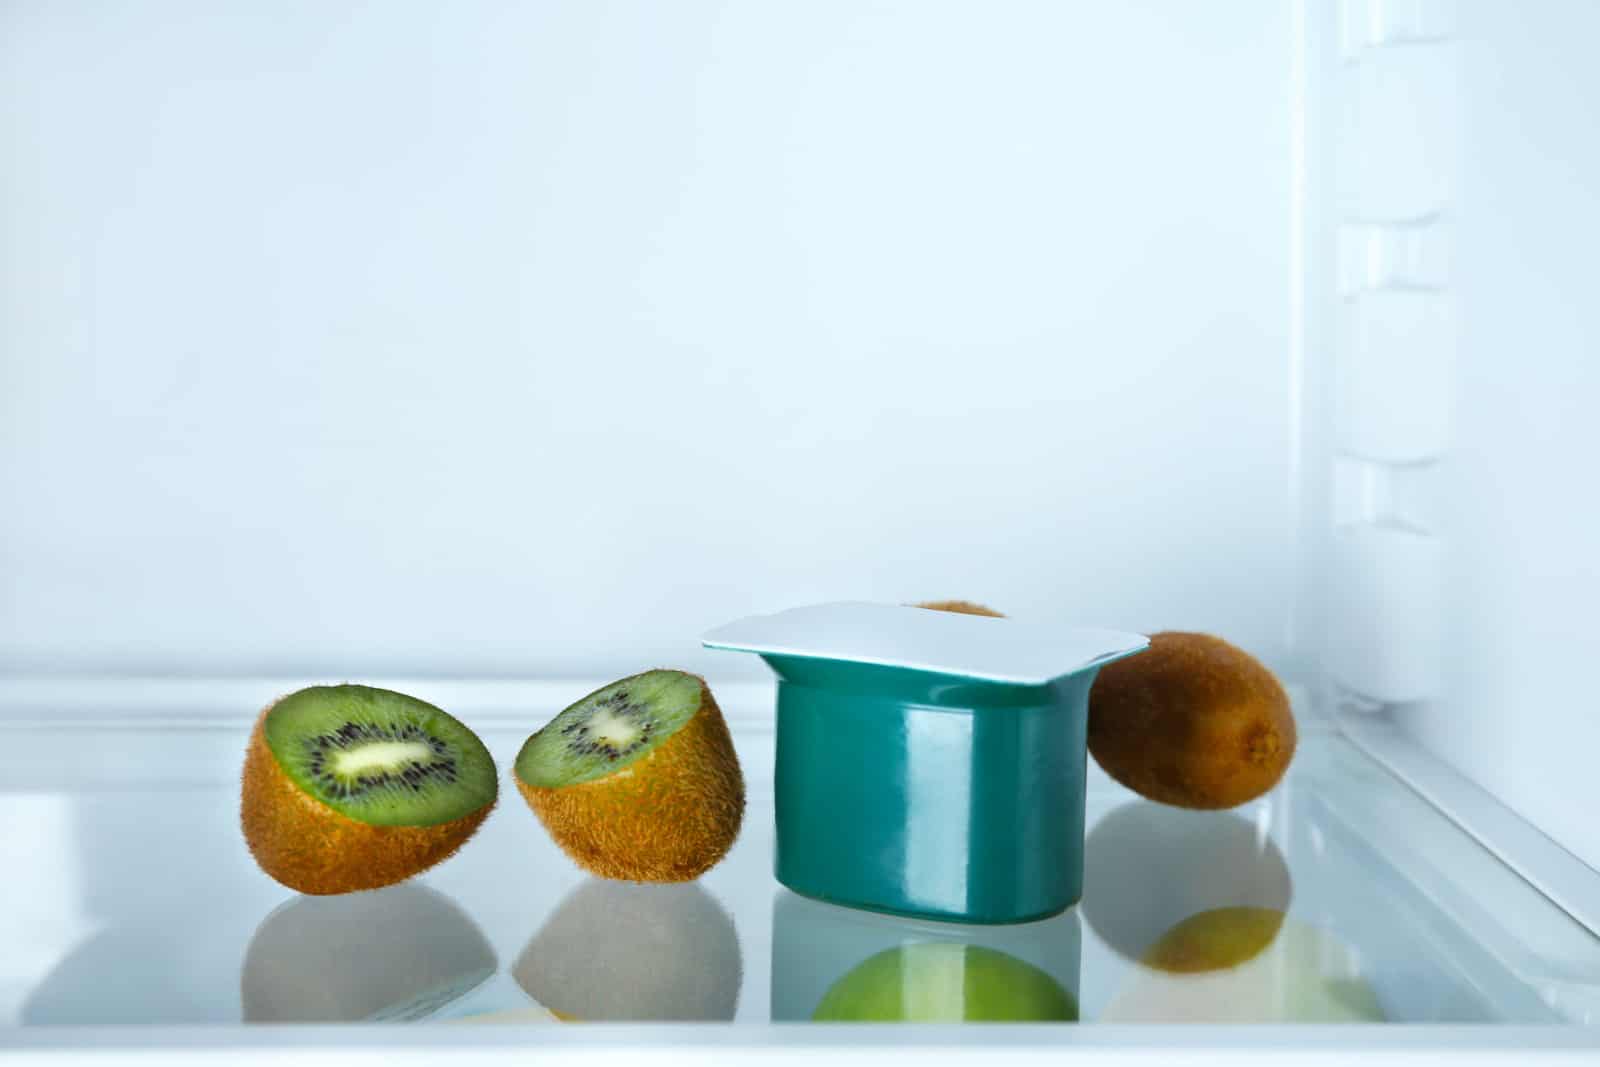 Plastic cup with yogurt and kiwi in refrigerator